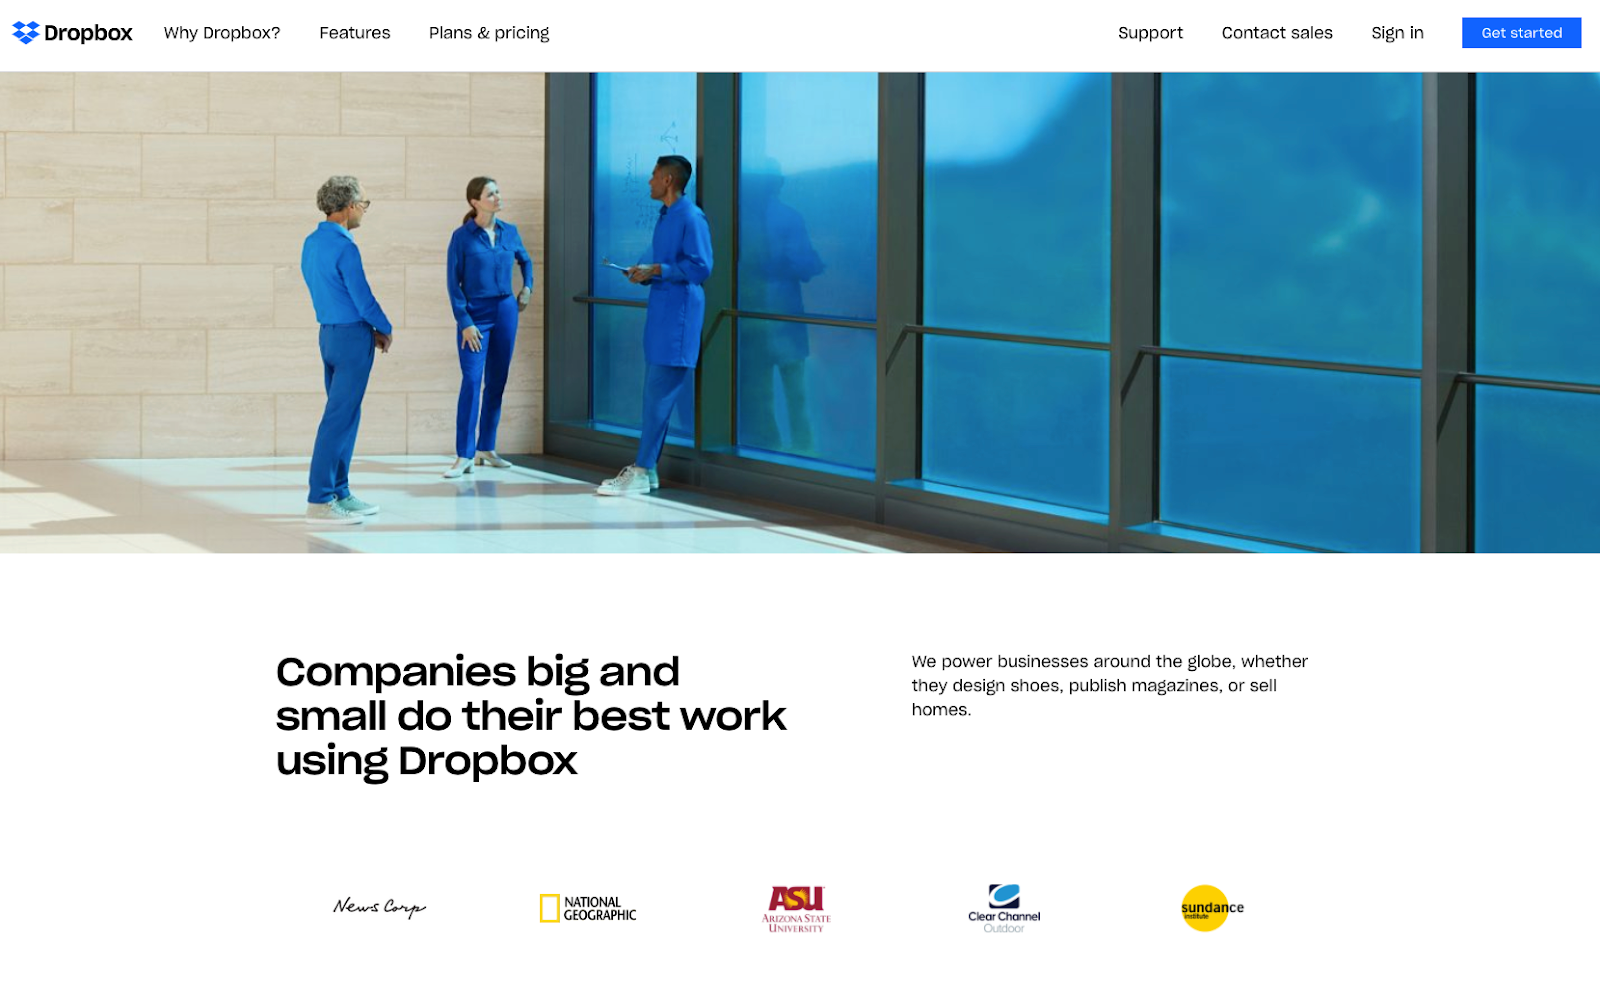 Dropbox's use of white space is another example of web design trends for 2022